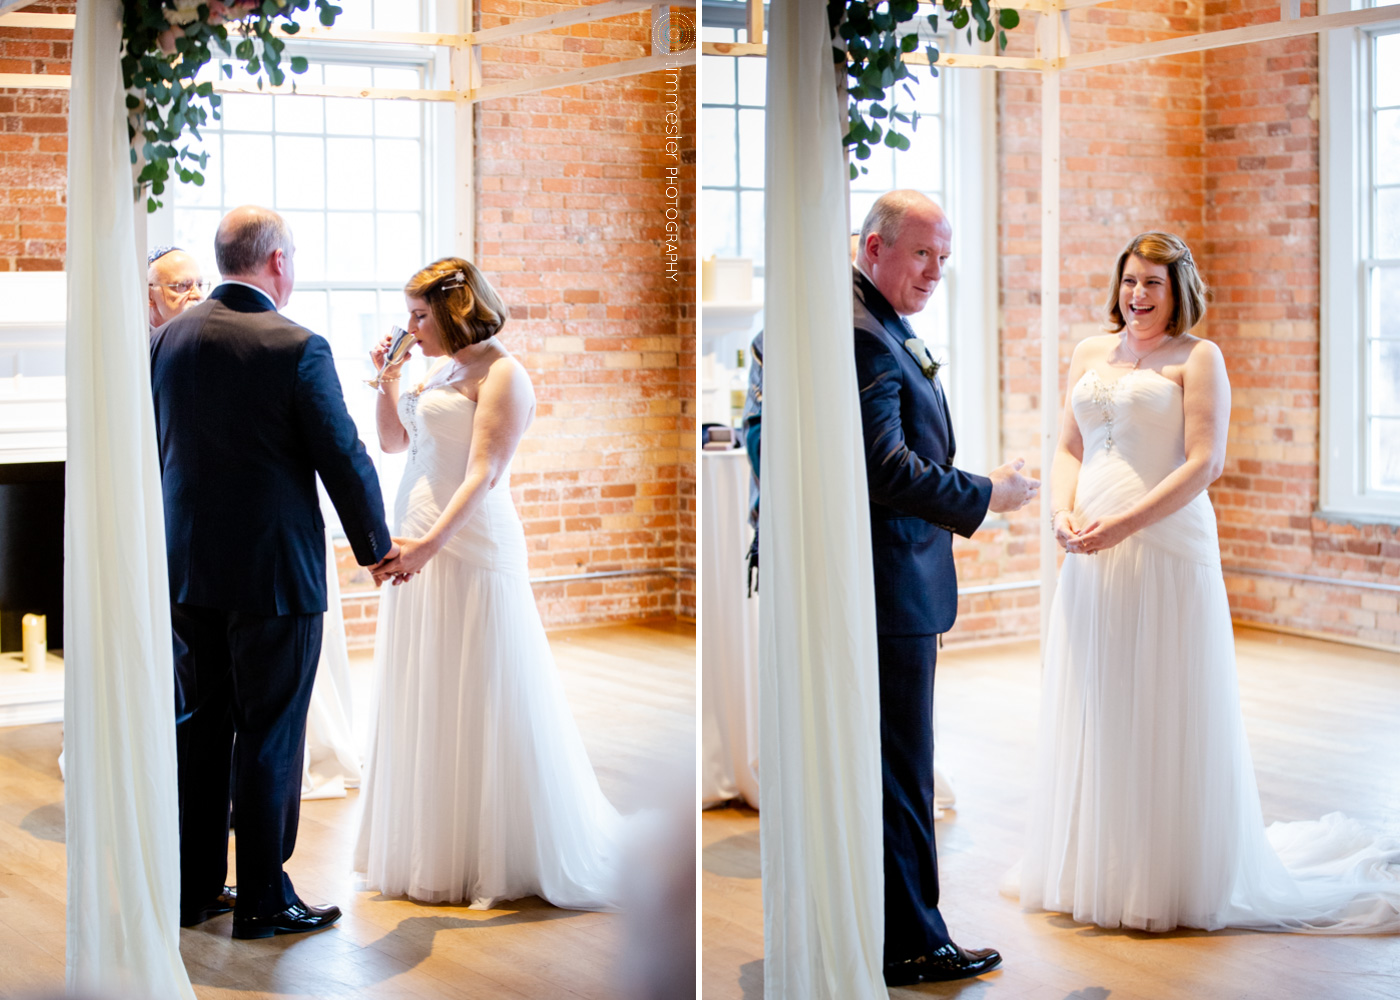 The winter wedding of Jessica + David in Durham, NC at The Cotton Room